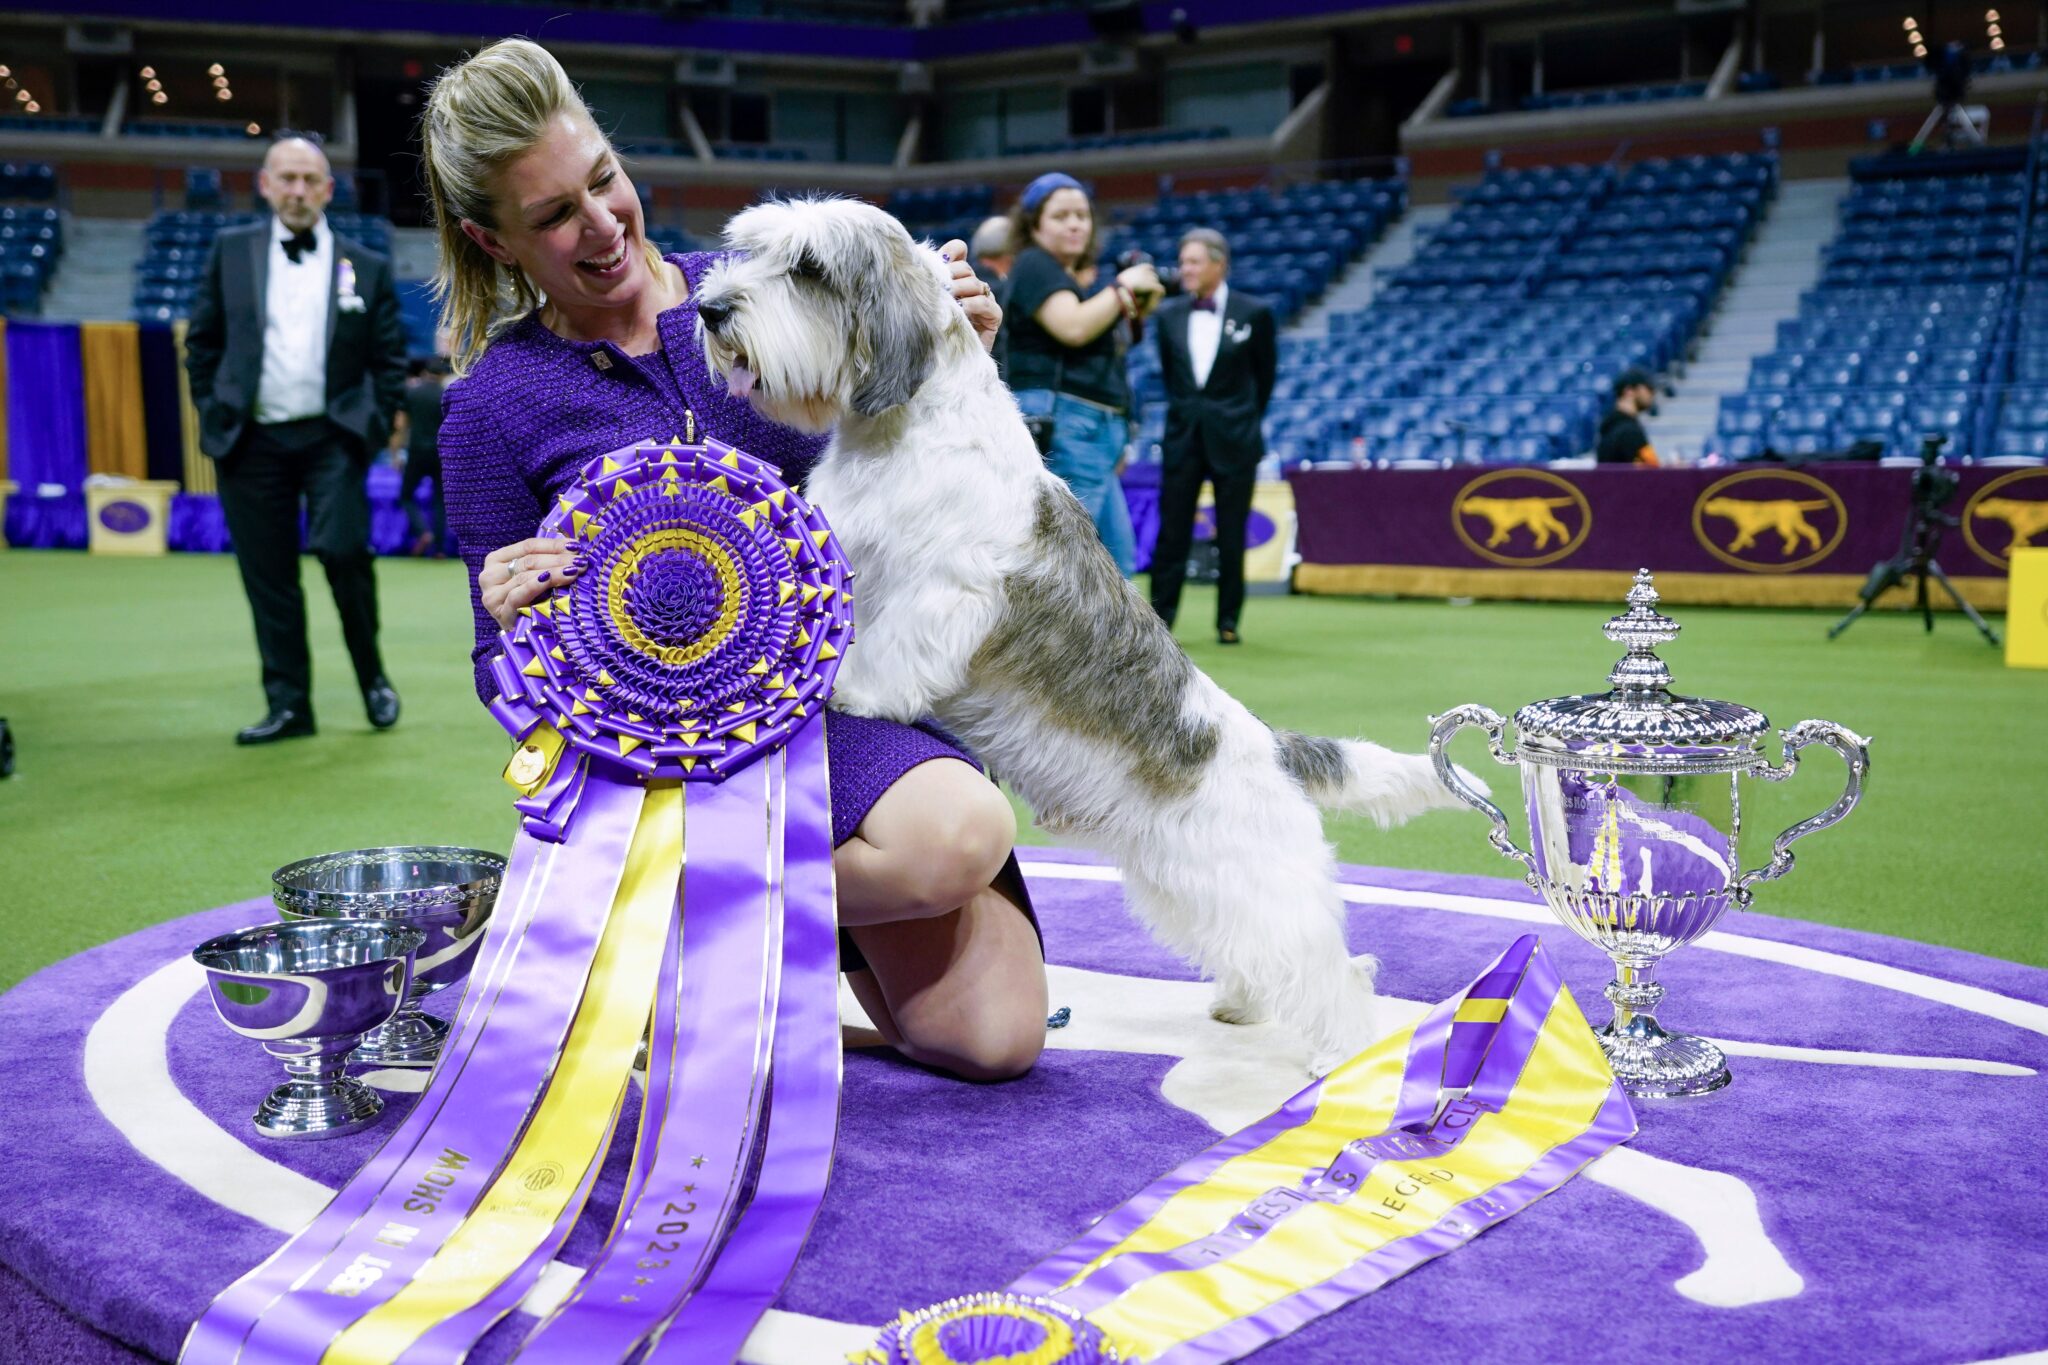 Crowning Glory Westminster Dog Show Winners Who Stole the Show